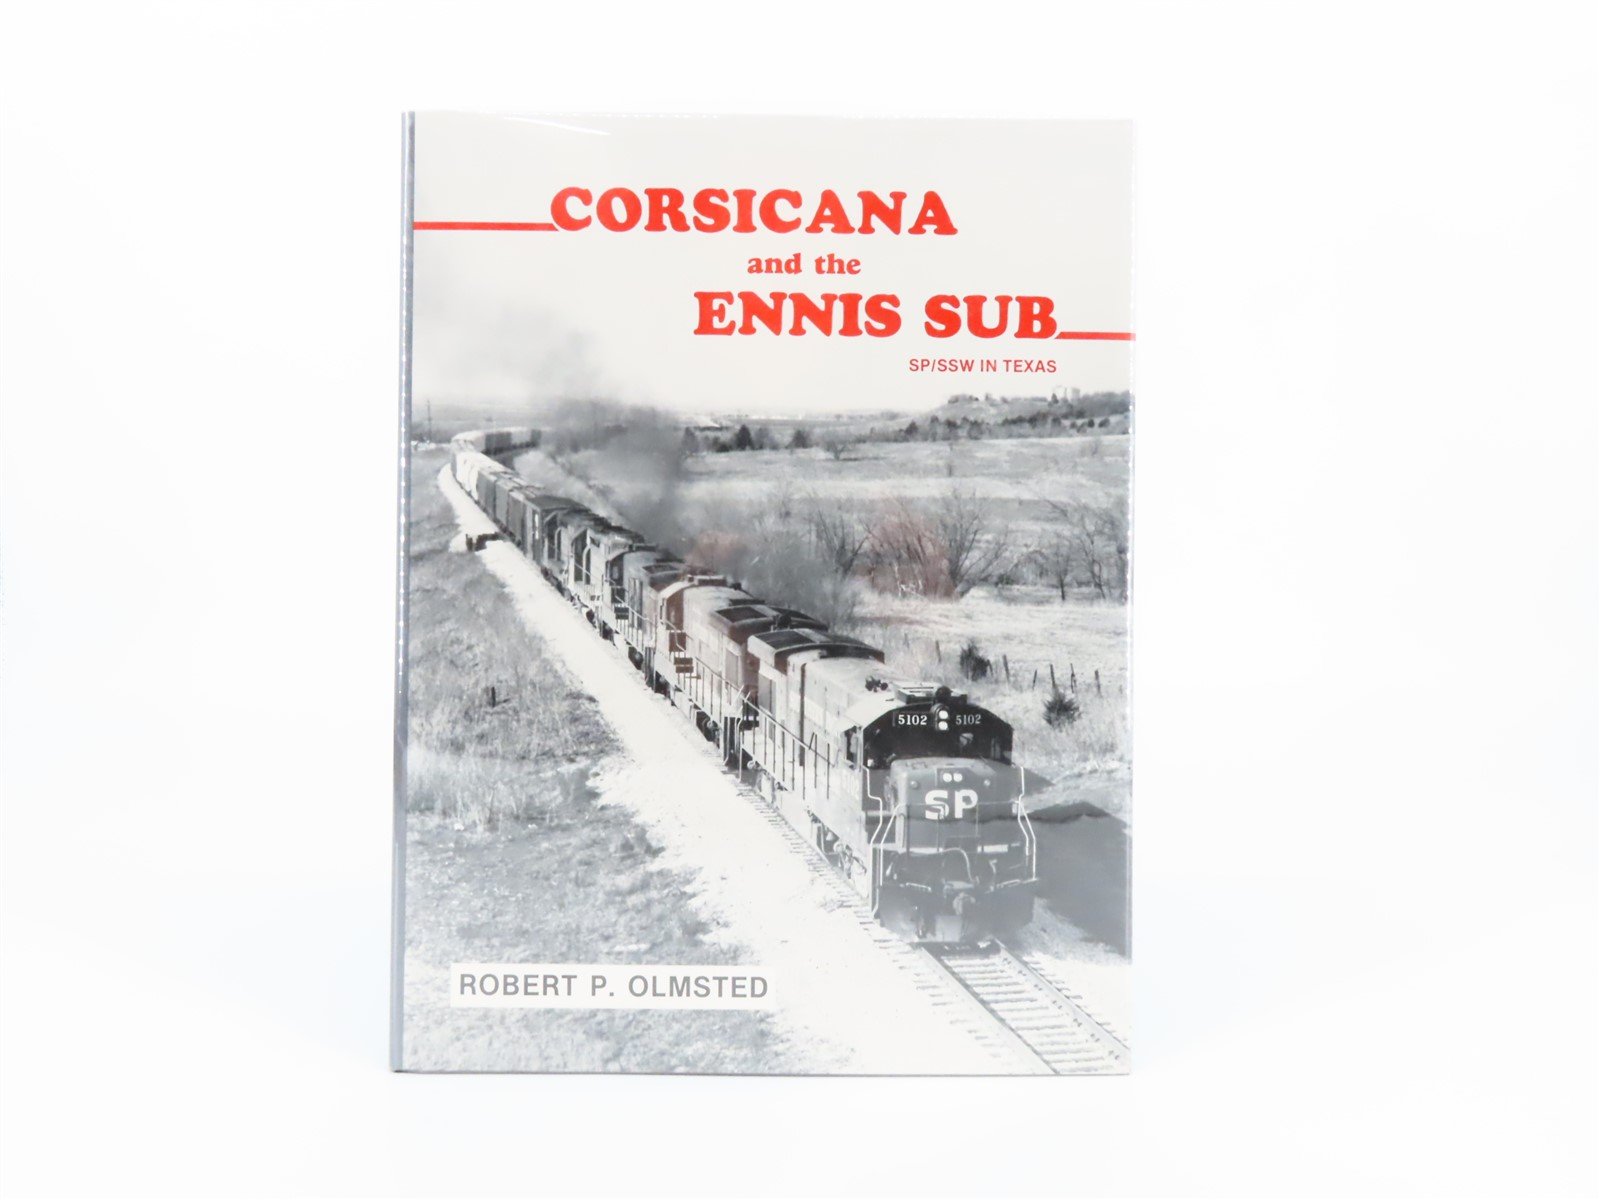 Corsicana and the Ennis Sub - SP/SSW In Texas by R.P. Olmsted ©1983 HC Book